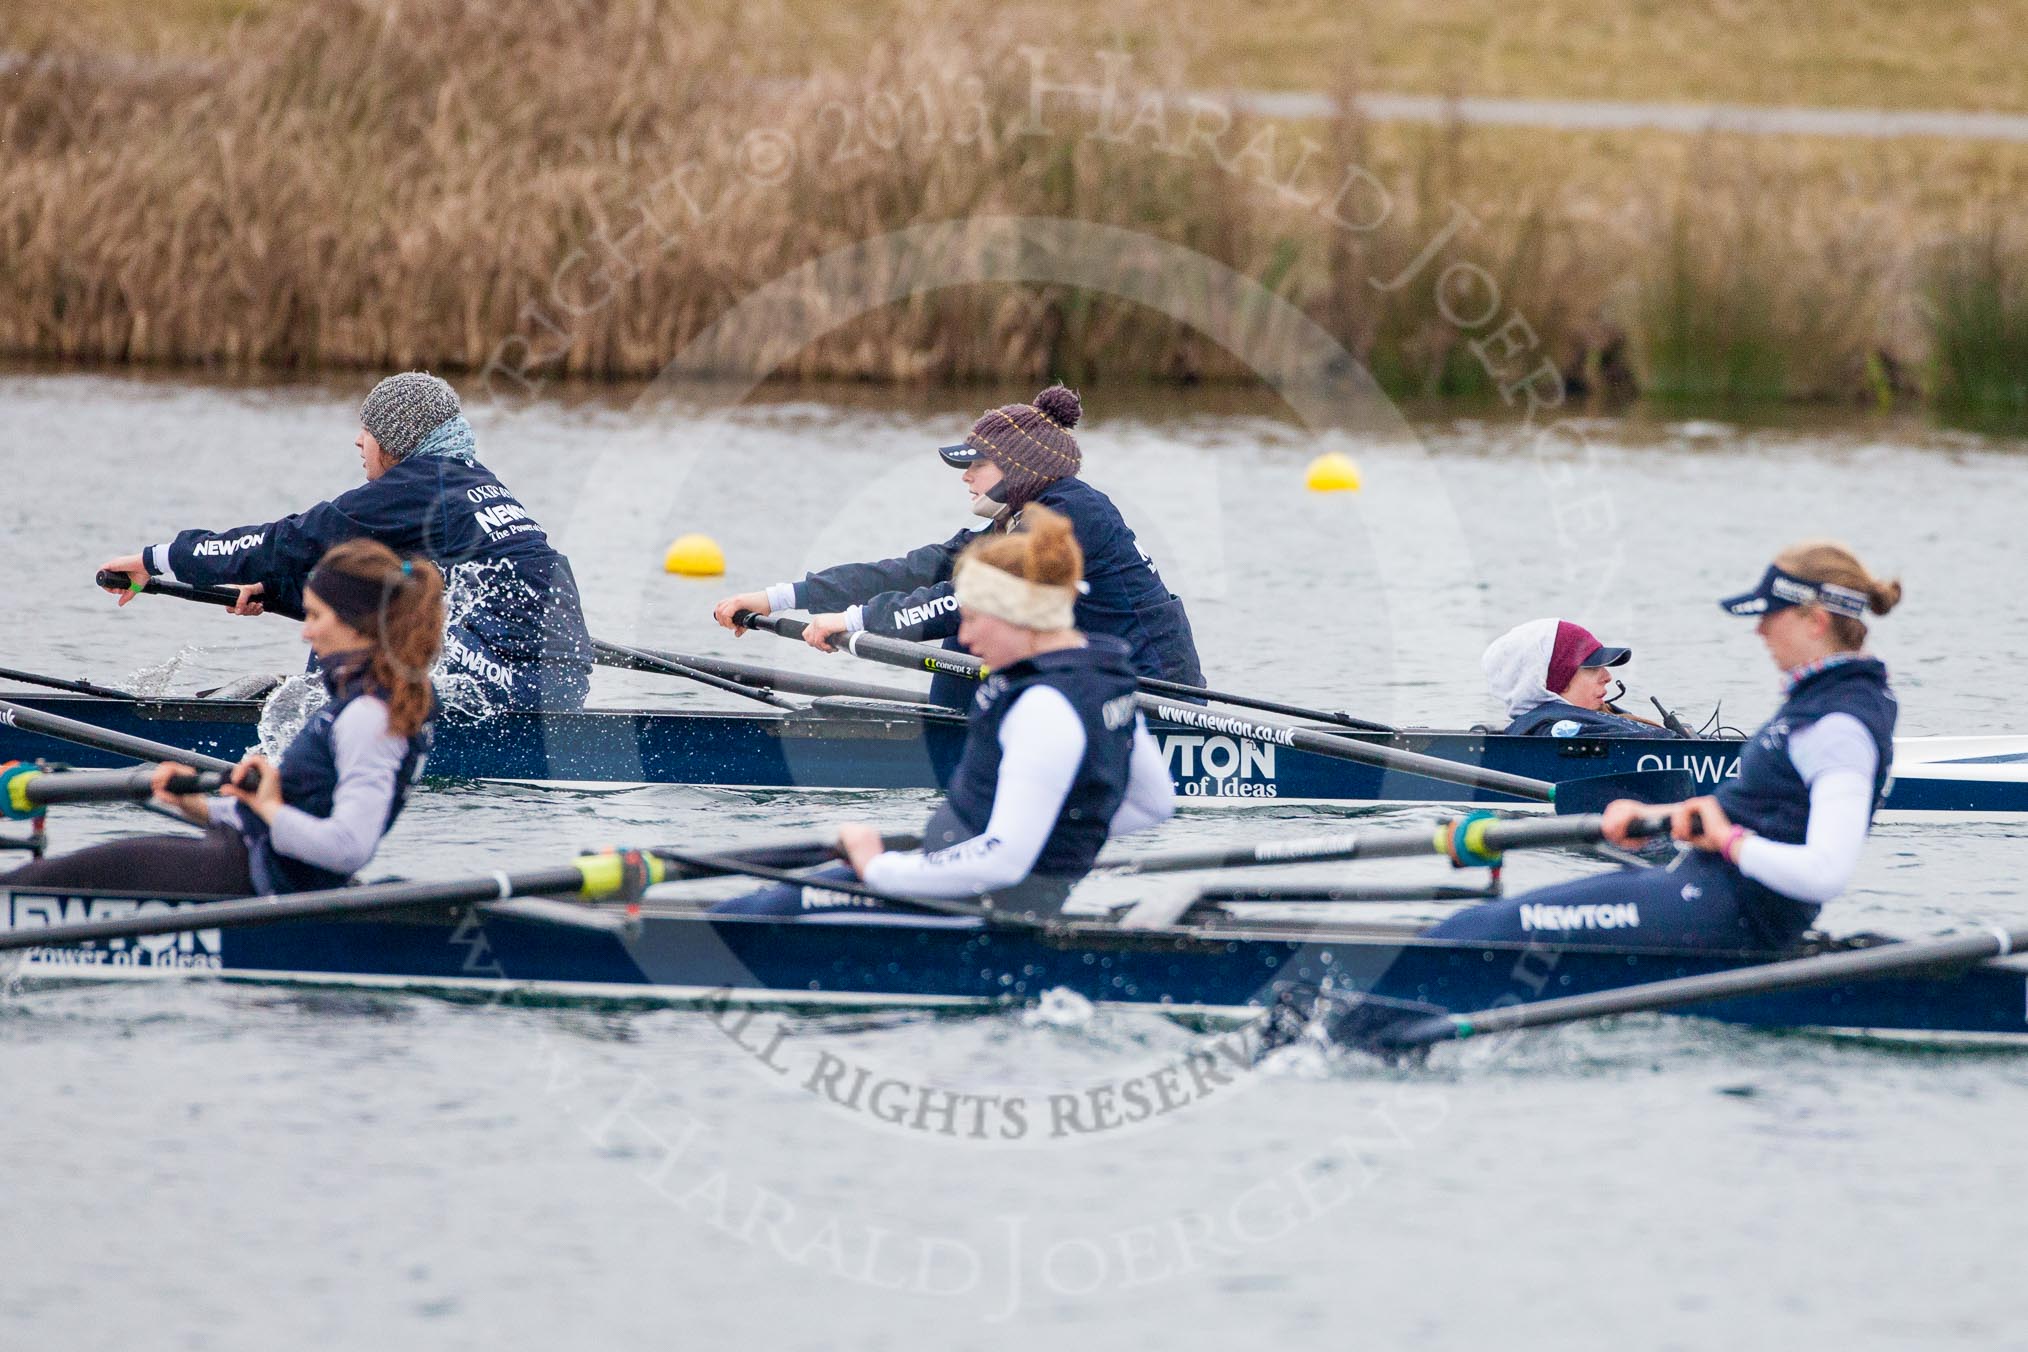 The Boat Race season 2013 - fixture OUWBC vs Molesey BC: Two OUWBC coxed fours racing each other, in the background Rachel Purkess, bow Elspeth Cumber with Olivia Cleary coxing, in the foreground stroke Coralie Viollet-Djelassi, Eleanor Darlington and Maria Mazza in the second OUWBC boat..
Dorney Lake,
Dorney, Windsor,
Berkshire,
United Kingdom,
on 24 February 2013 at 12:19, image #129